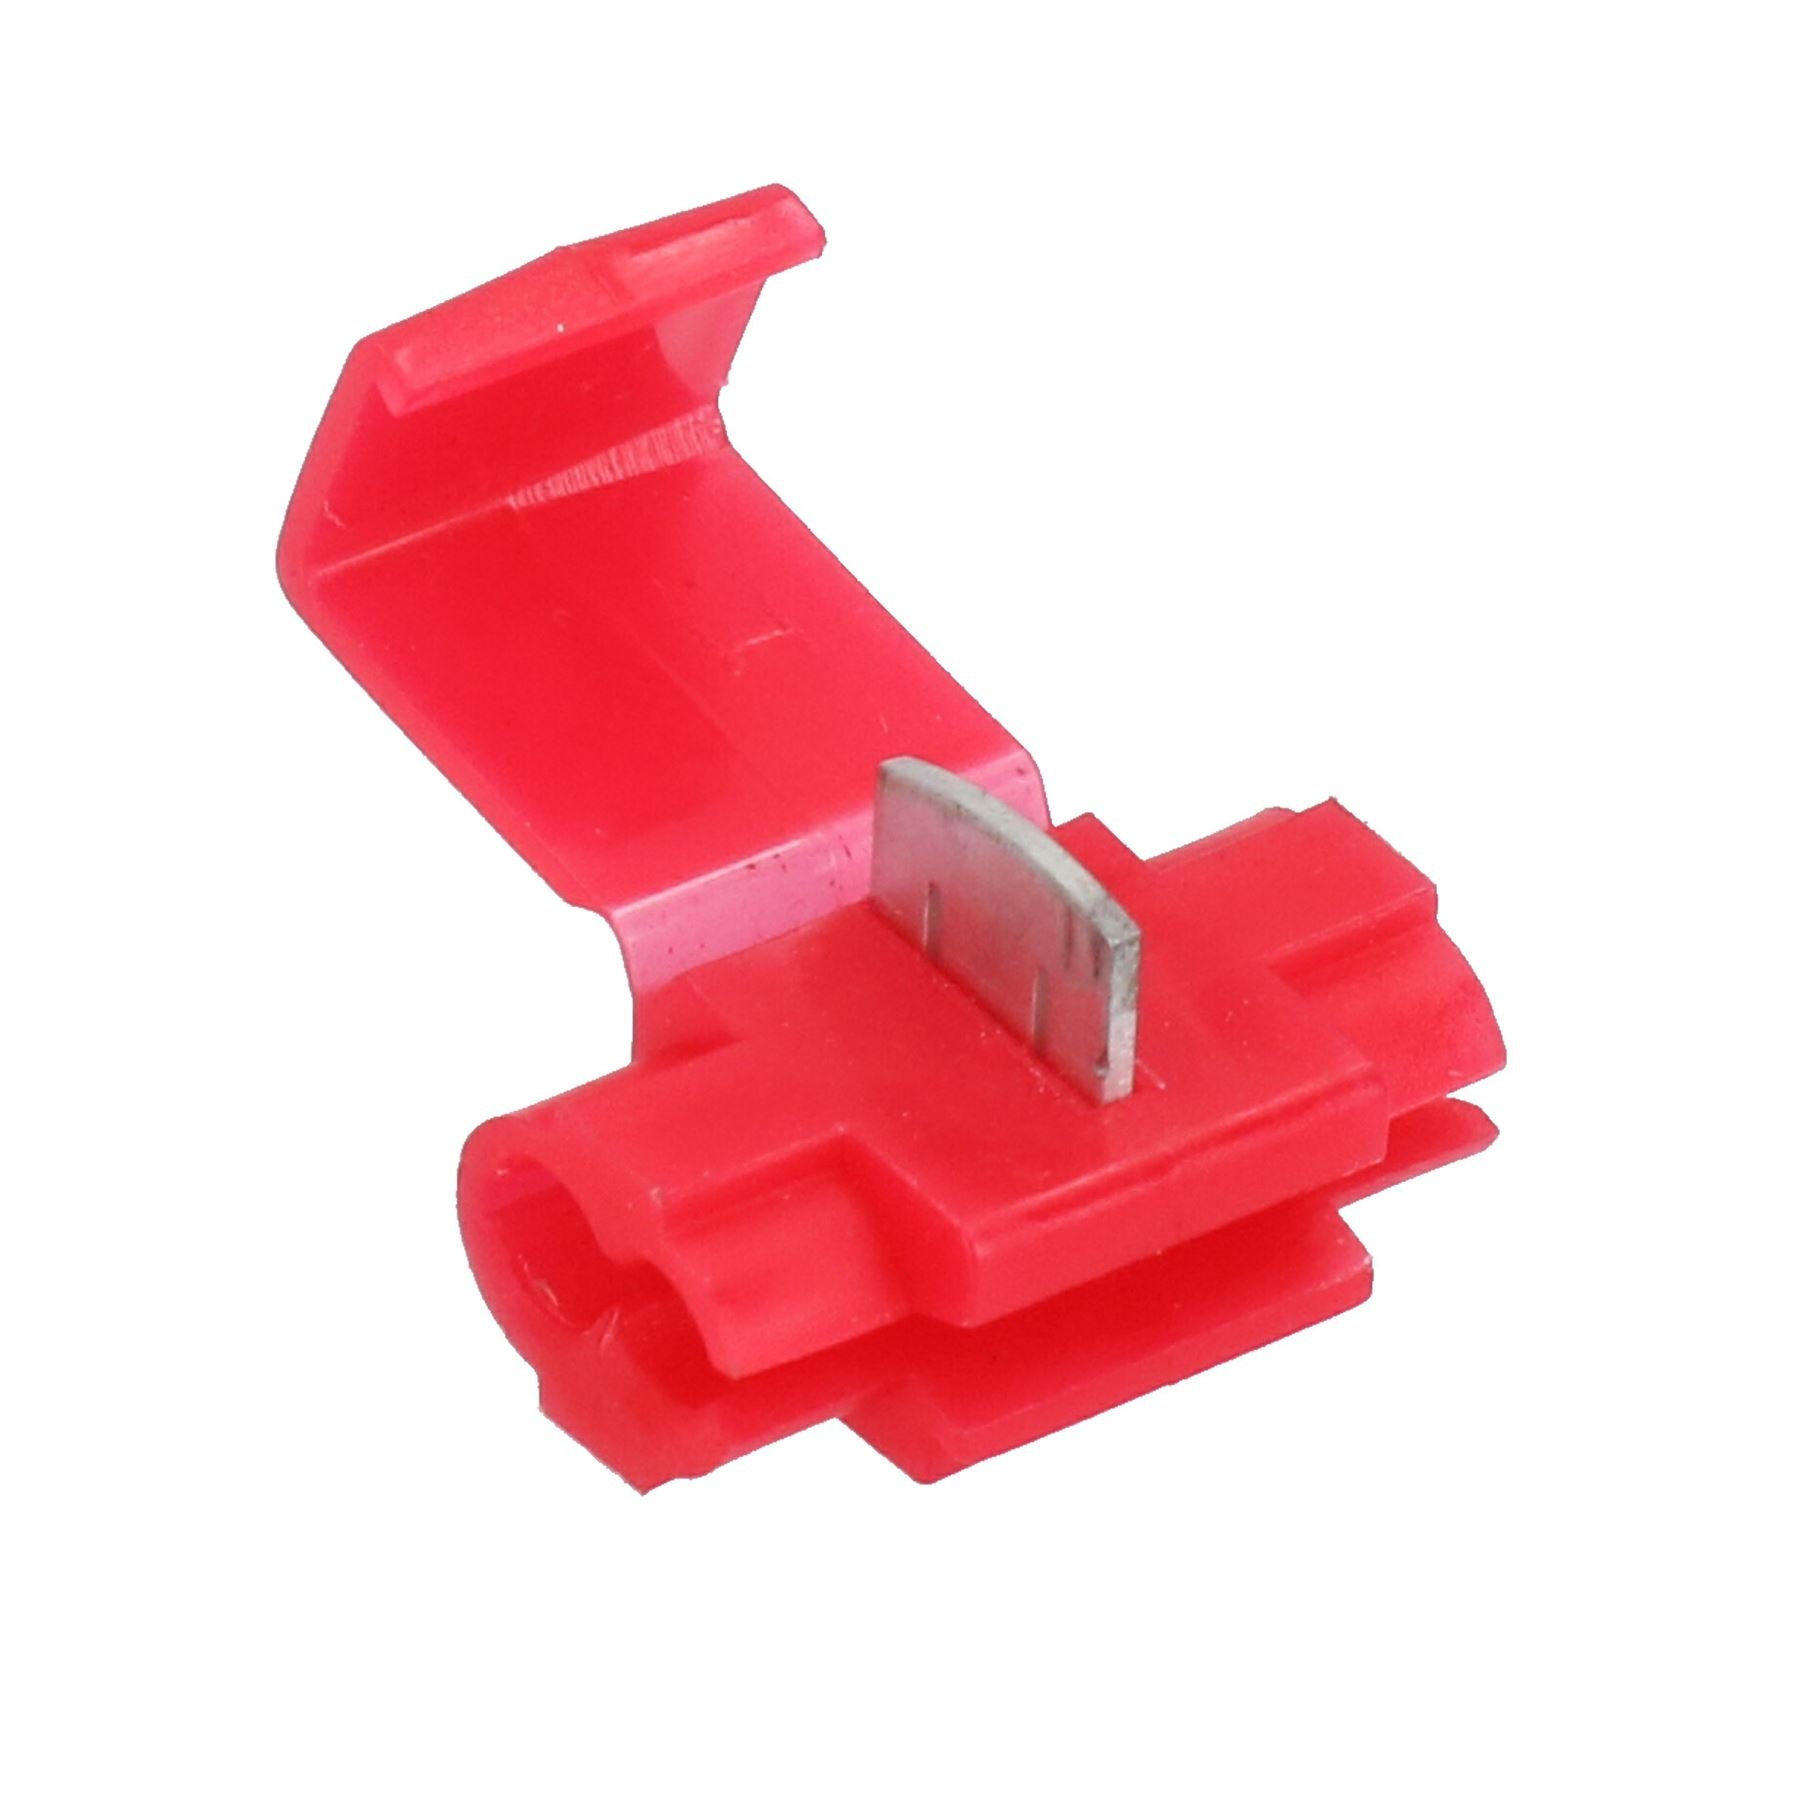 Scotch Lock / Snap Connector Set Red Plastic Consumable Fastener